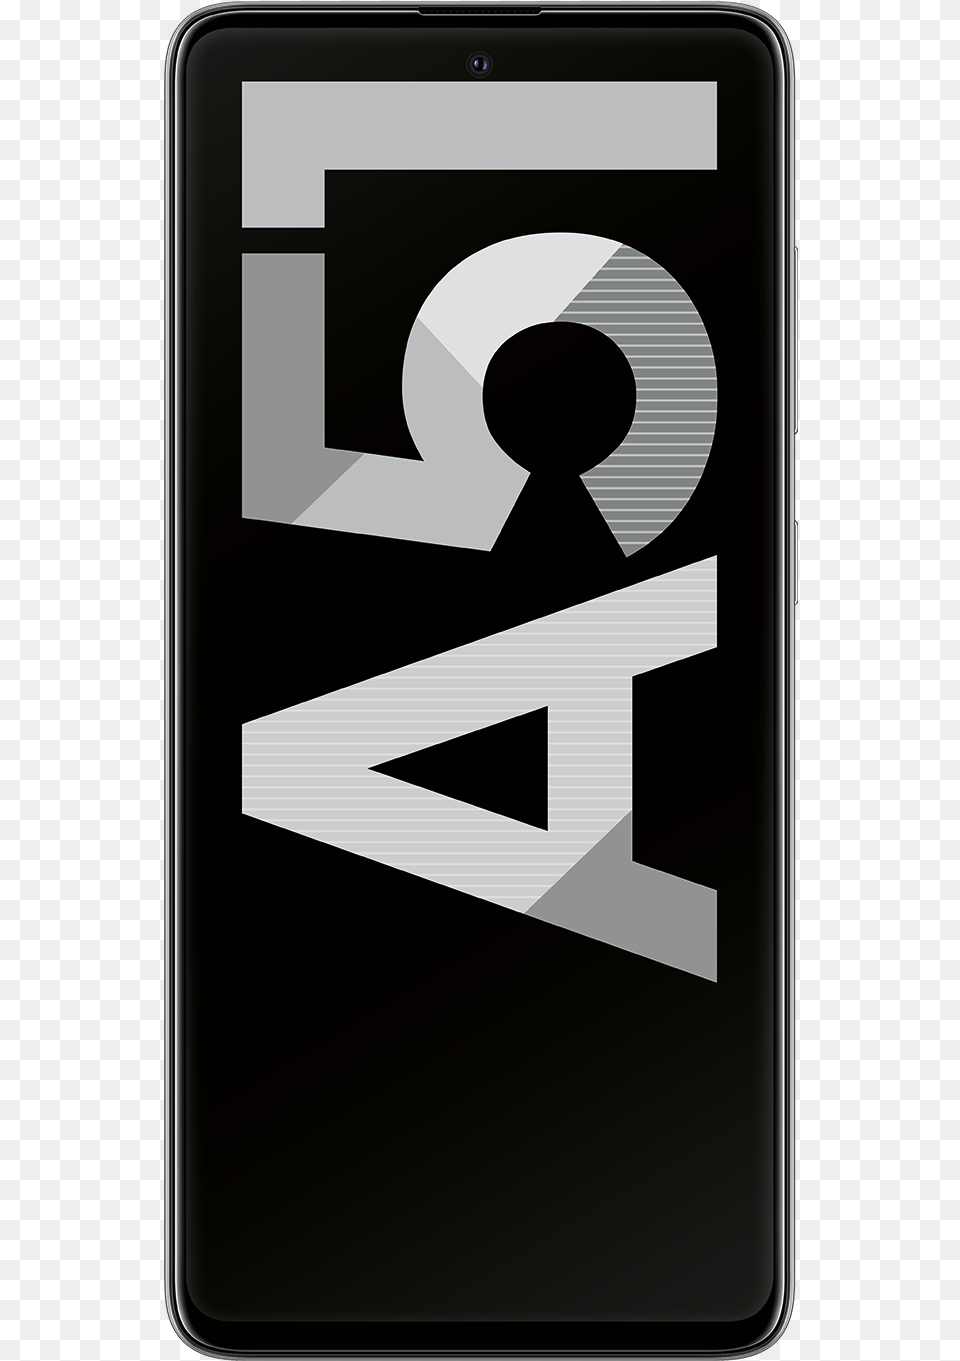 Samsung A515f Galaxy, Electronics, Mobile Phone, Phone, Text Png Image